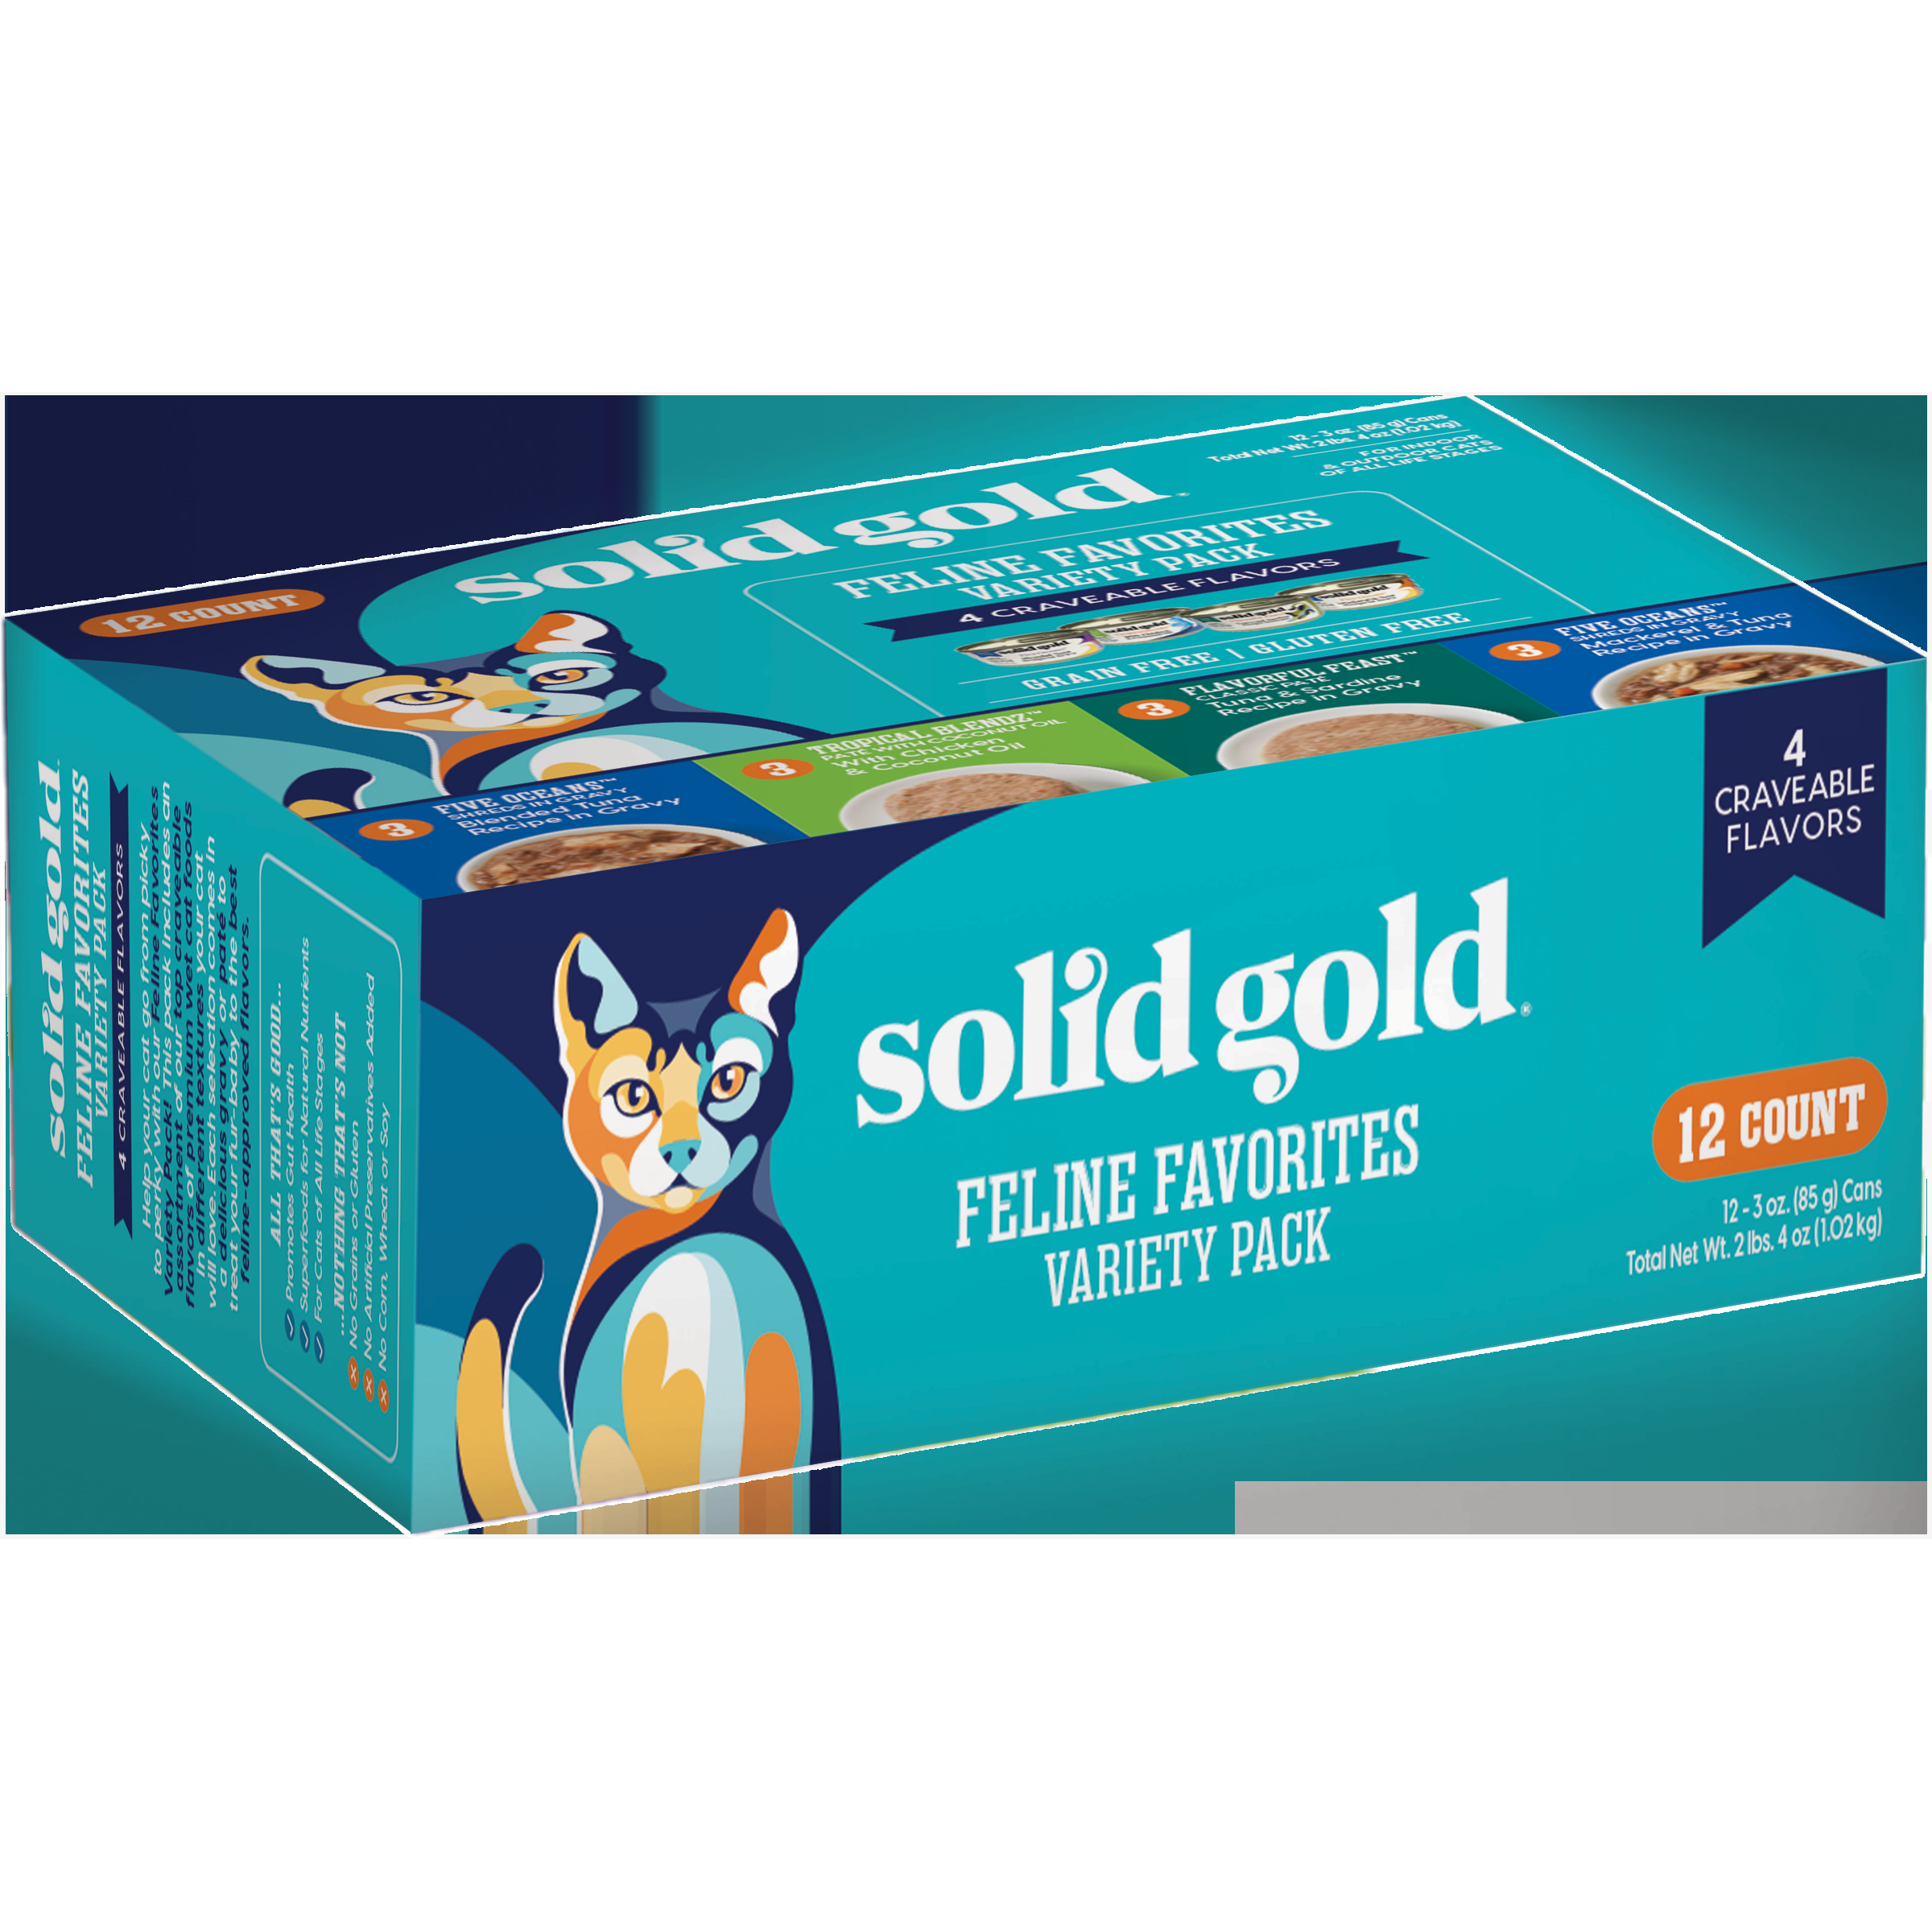 wet-cat-food-variety-pack with cash back rebate